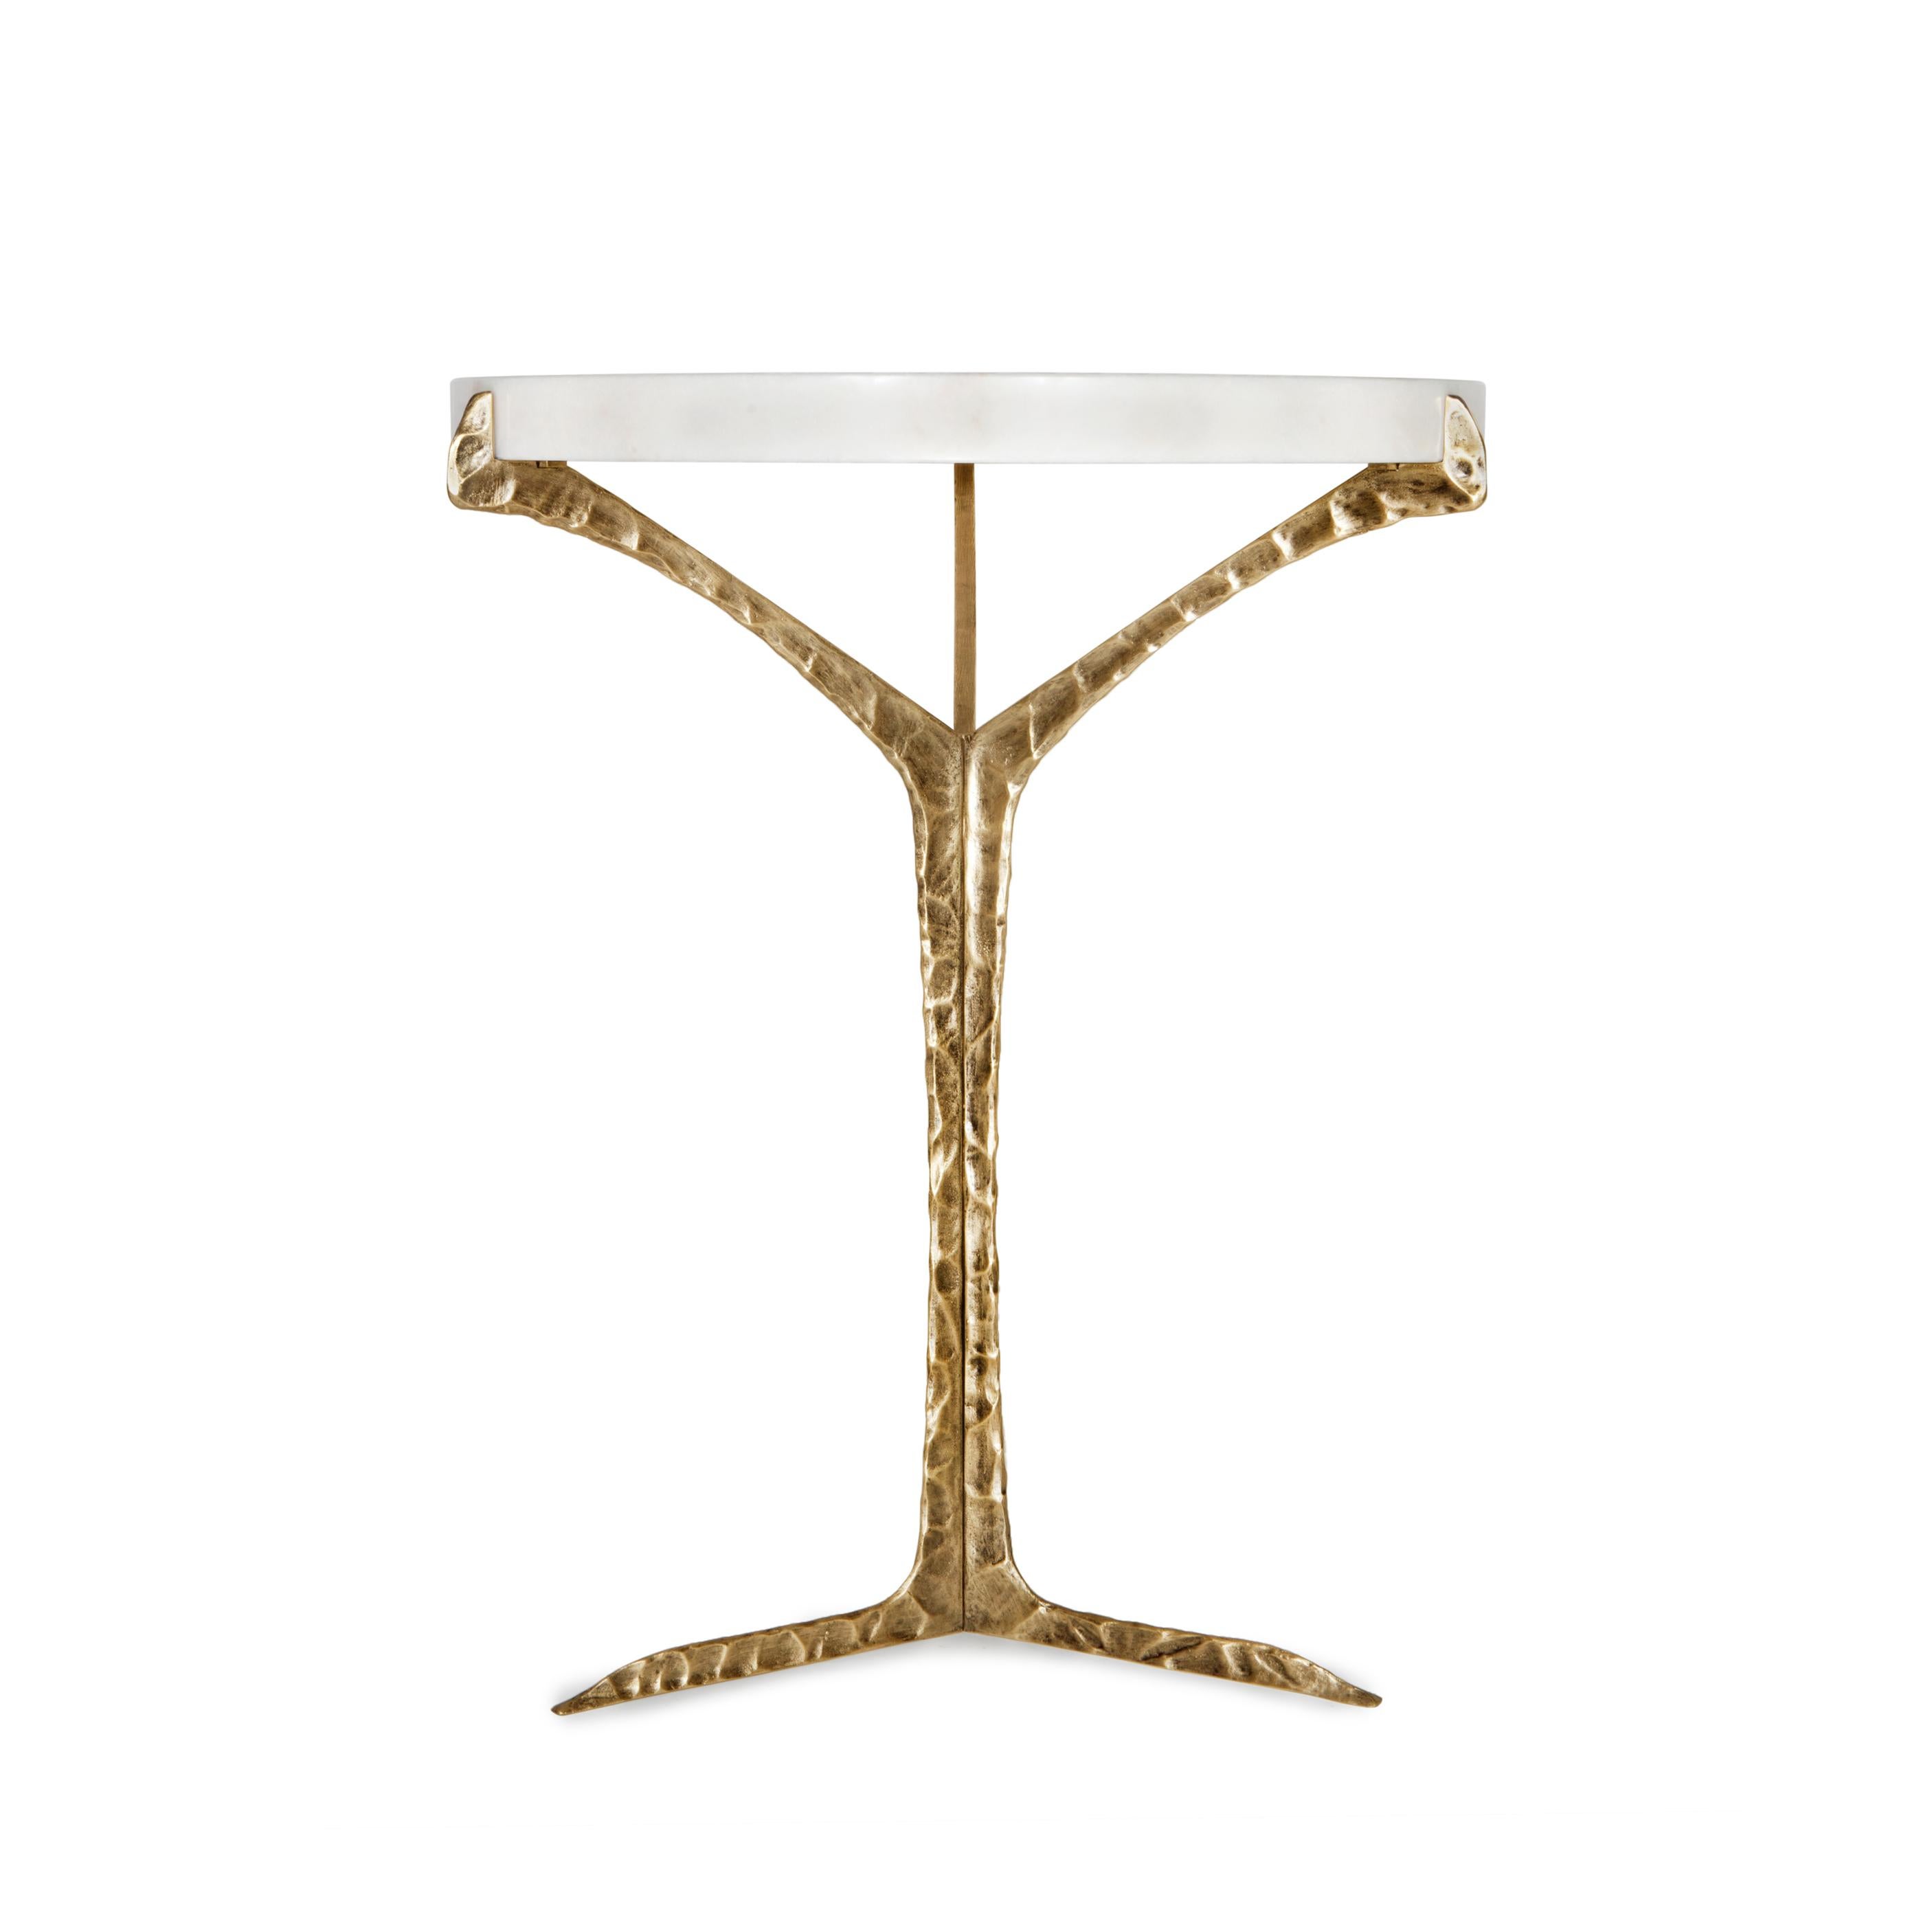 Alentejo side table is a glimpse over the South of Portugal where thousands of cork oaks trees raise their canopies to the sky.
Resembling the typical trees that spread across the horizon with their canopies gracefully balanced above the ground,